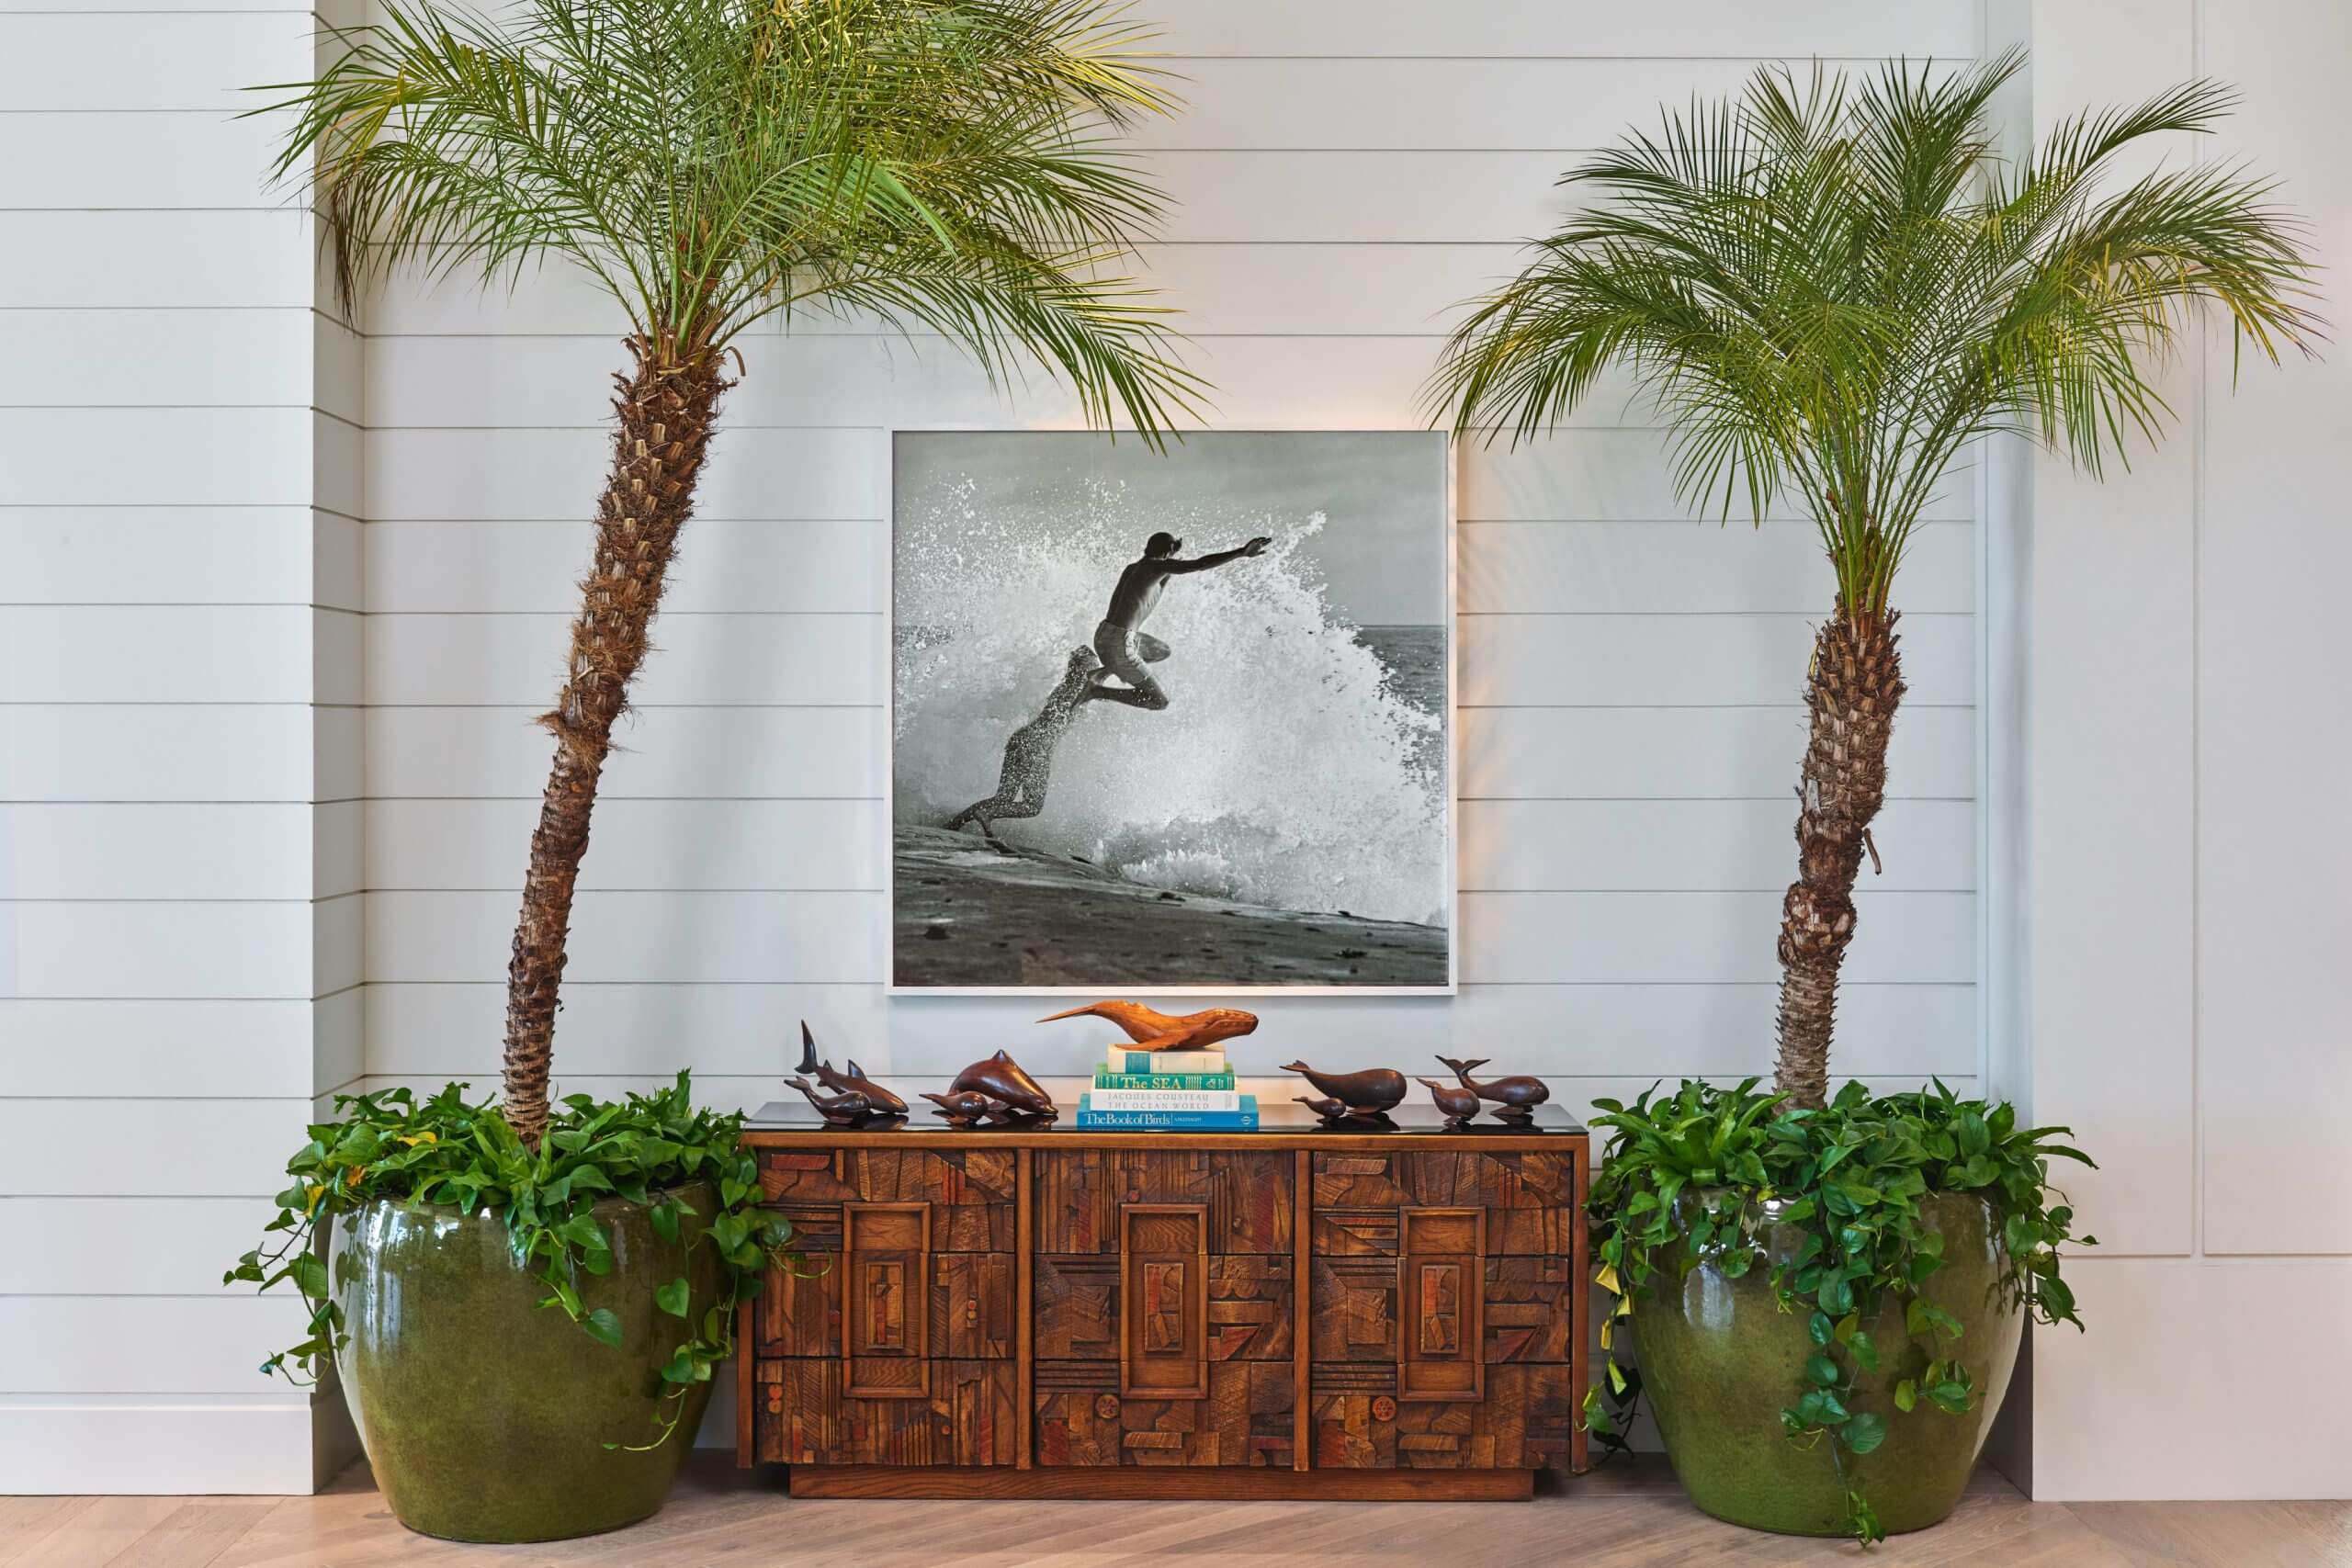 Palm trees with wood furniture